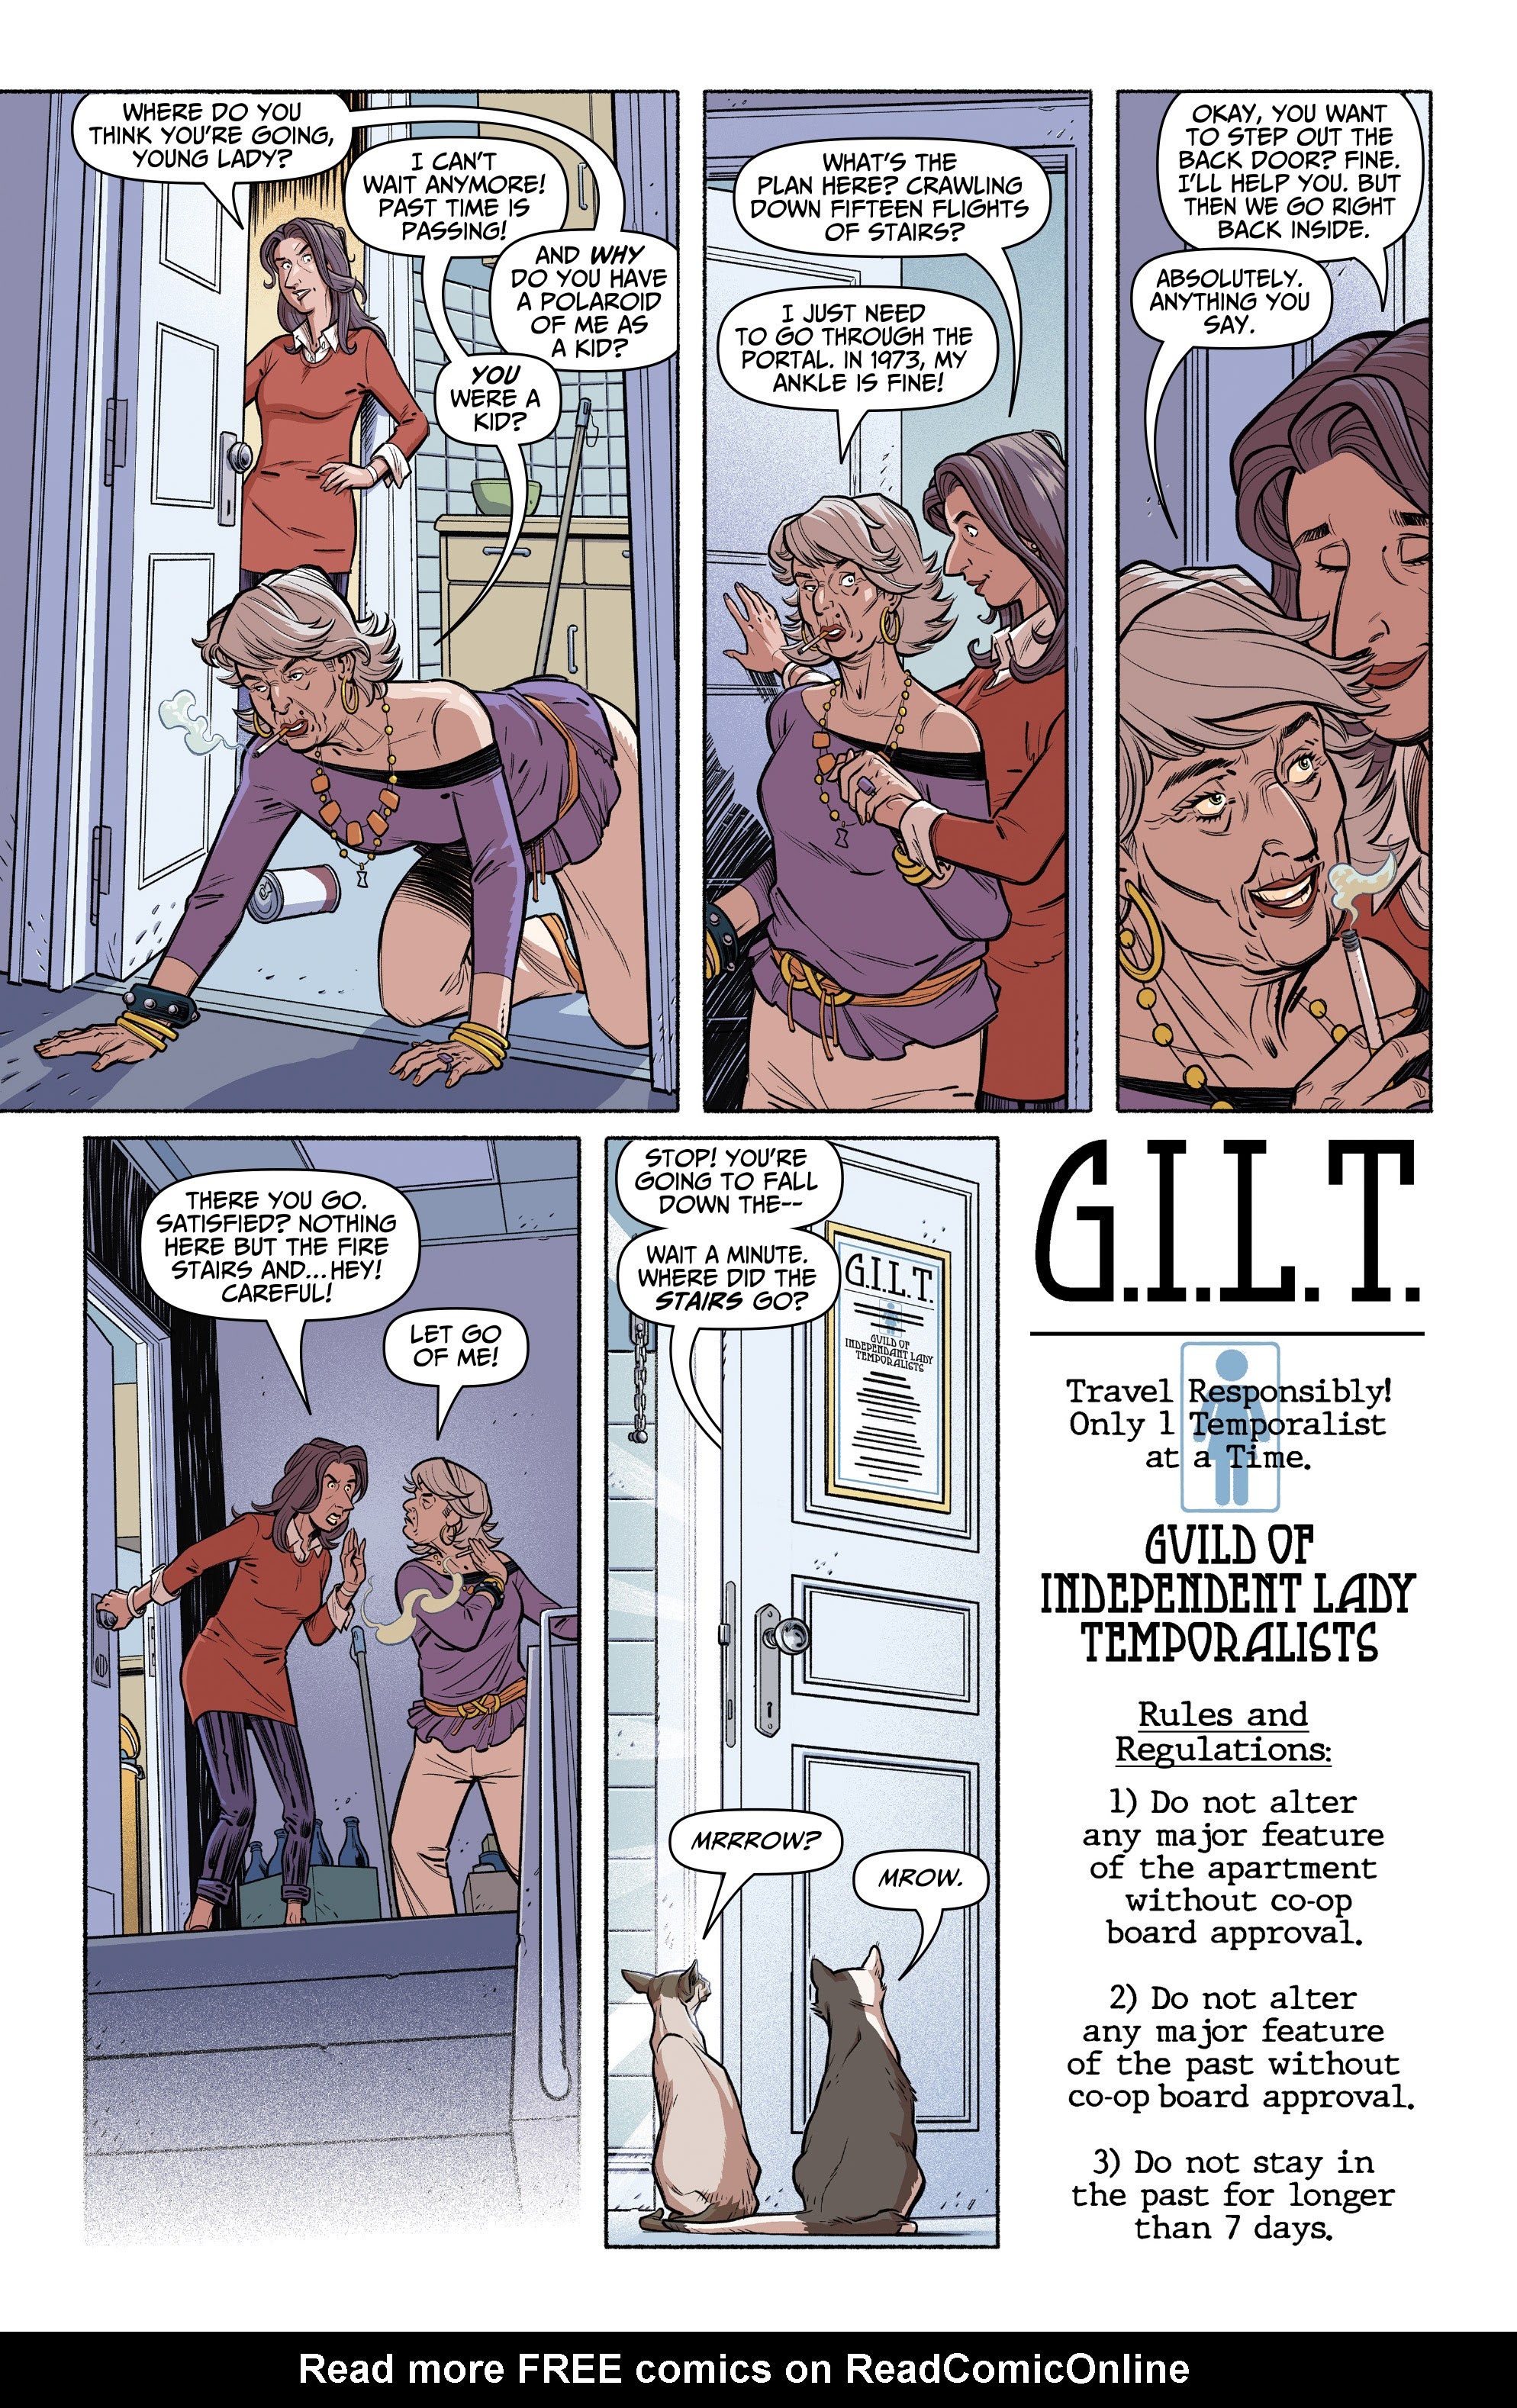 Read online G.I.L.T. comic -  Issue #1 - 21